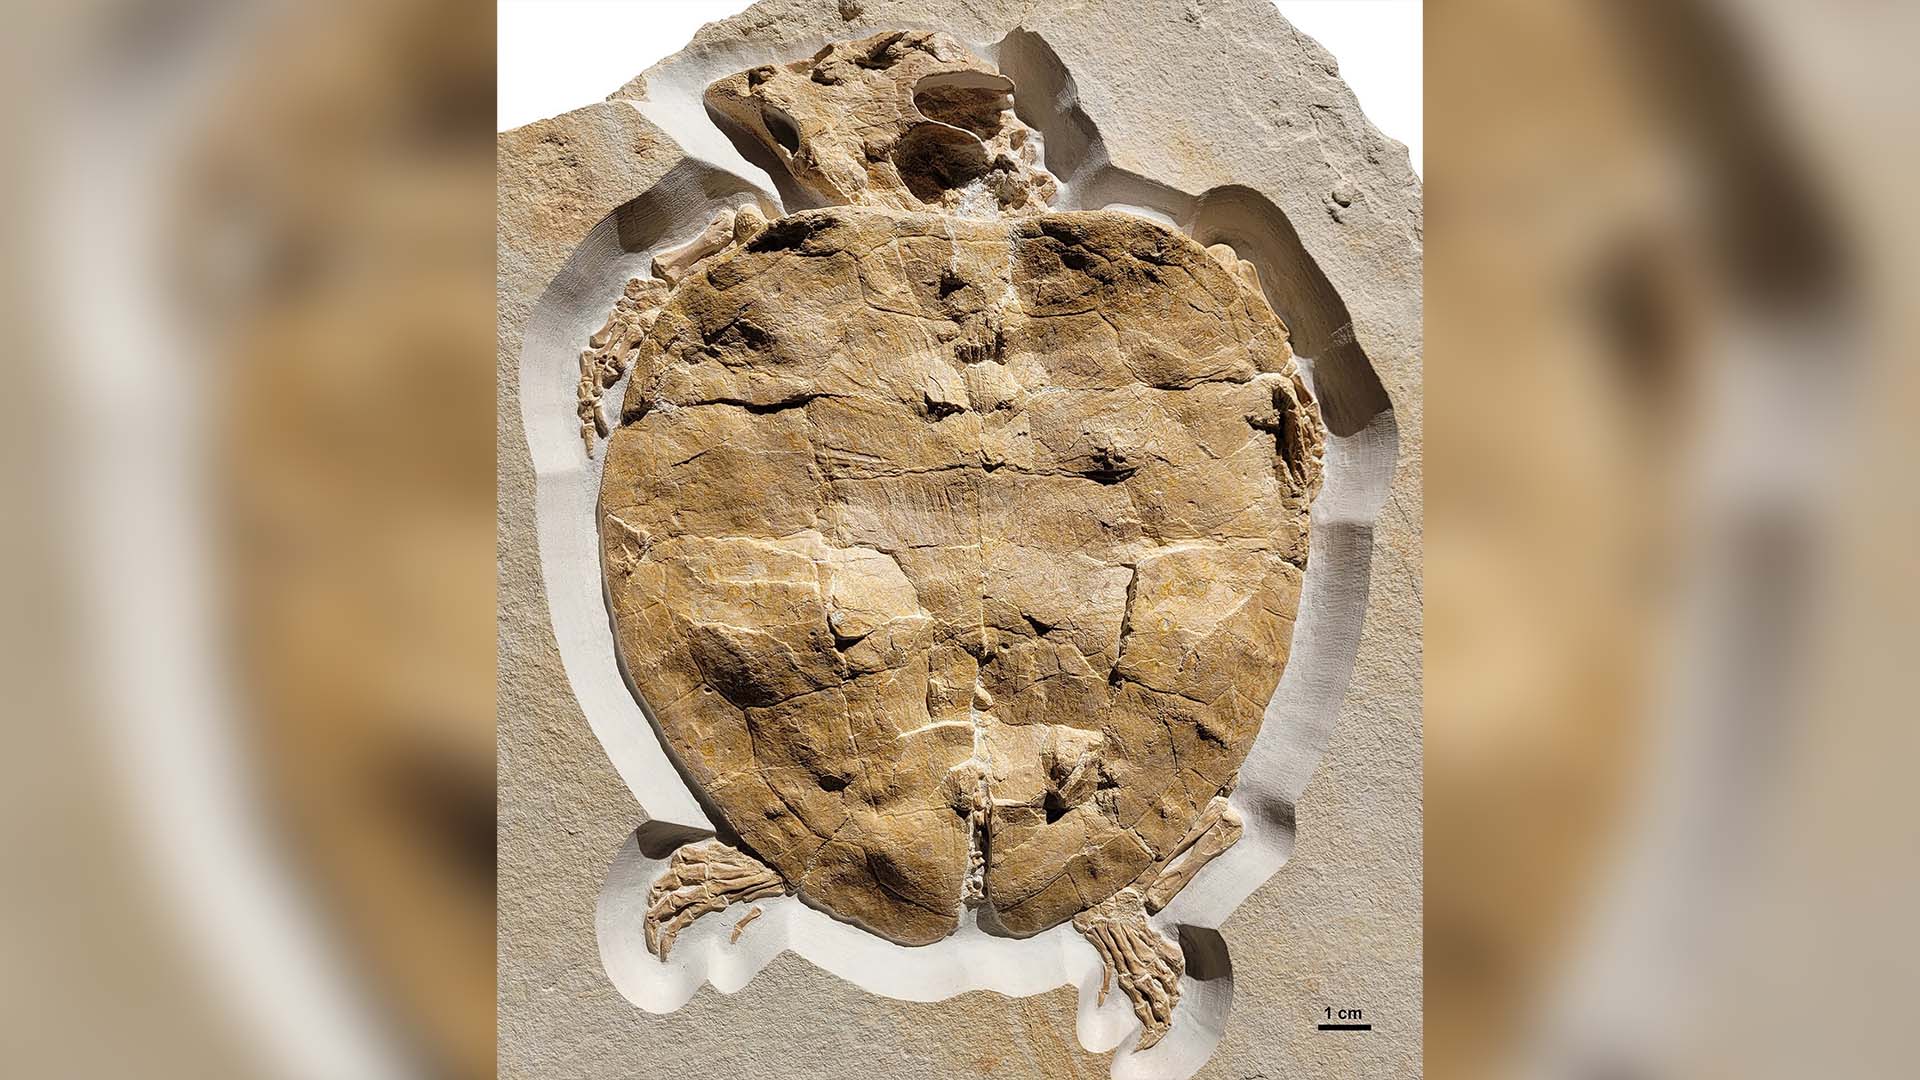 Scientists Discover Preserved Fossil of a 150-Million-Year-Old Turtle